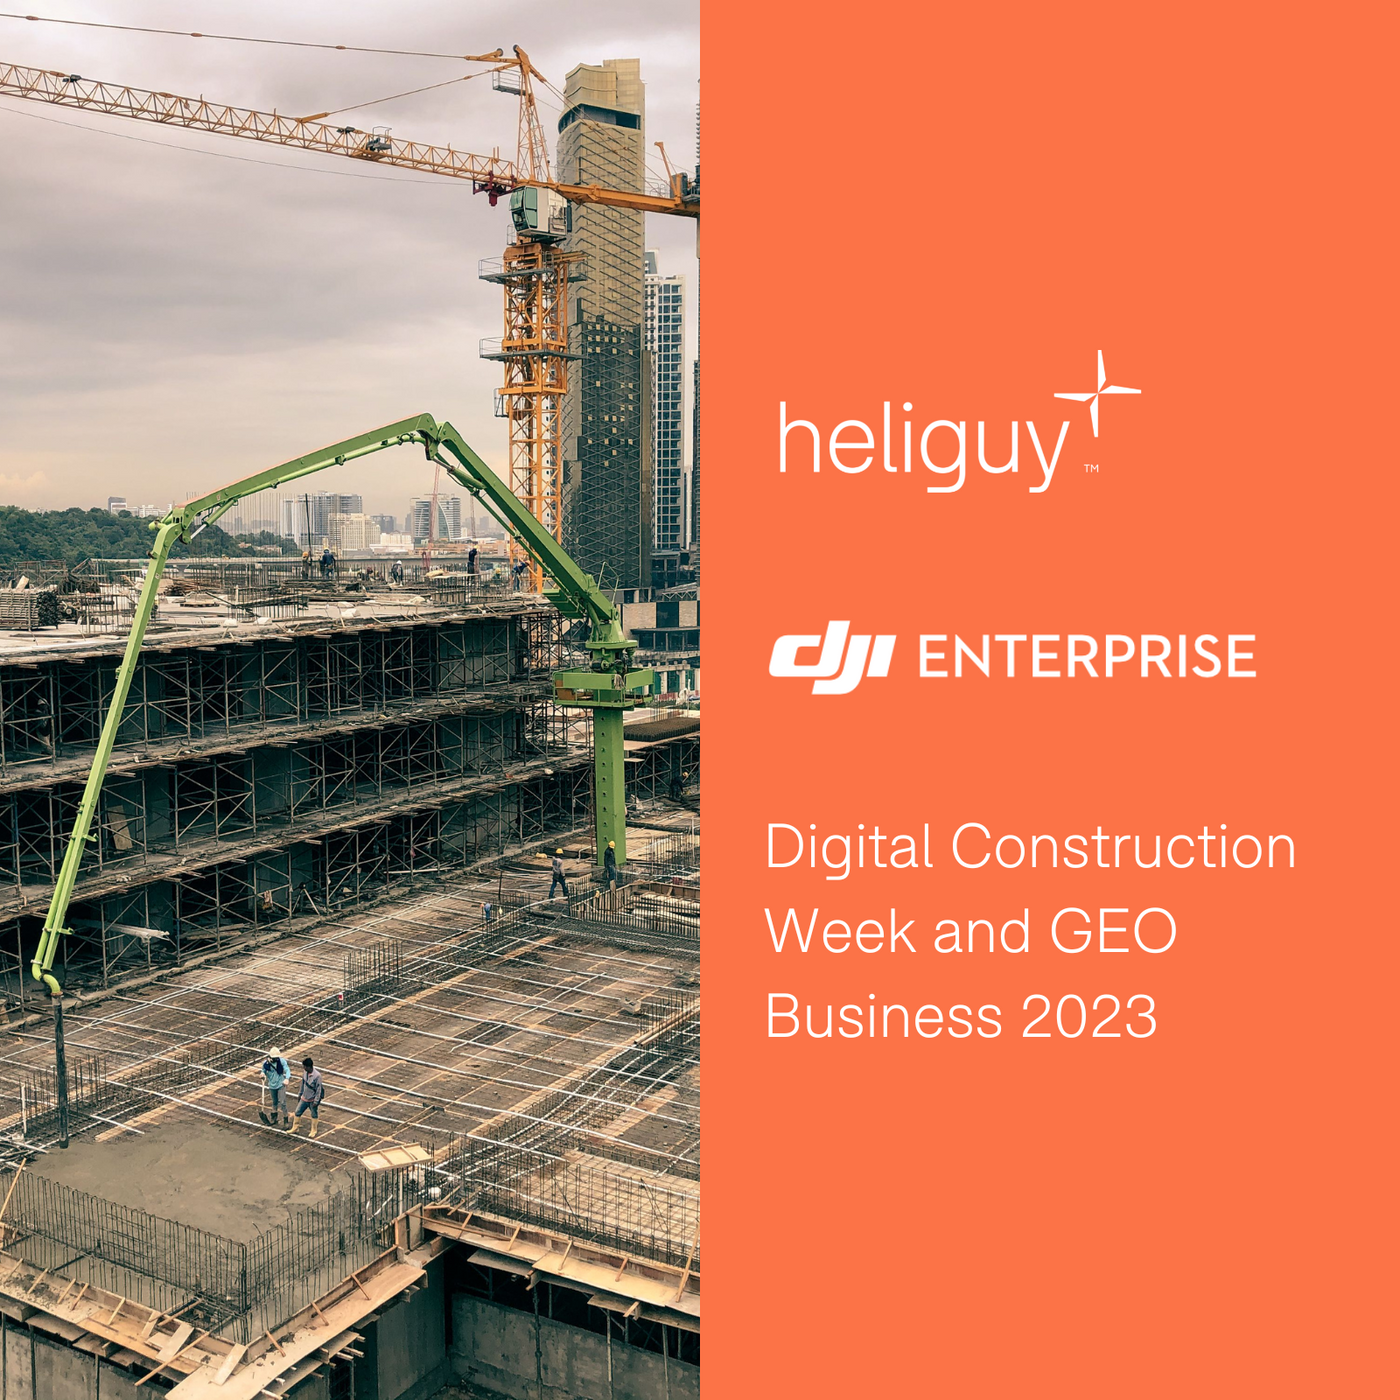 Heliguy And DJI Partner For Digital Construction Week And GEO Business 2023